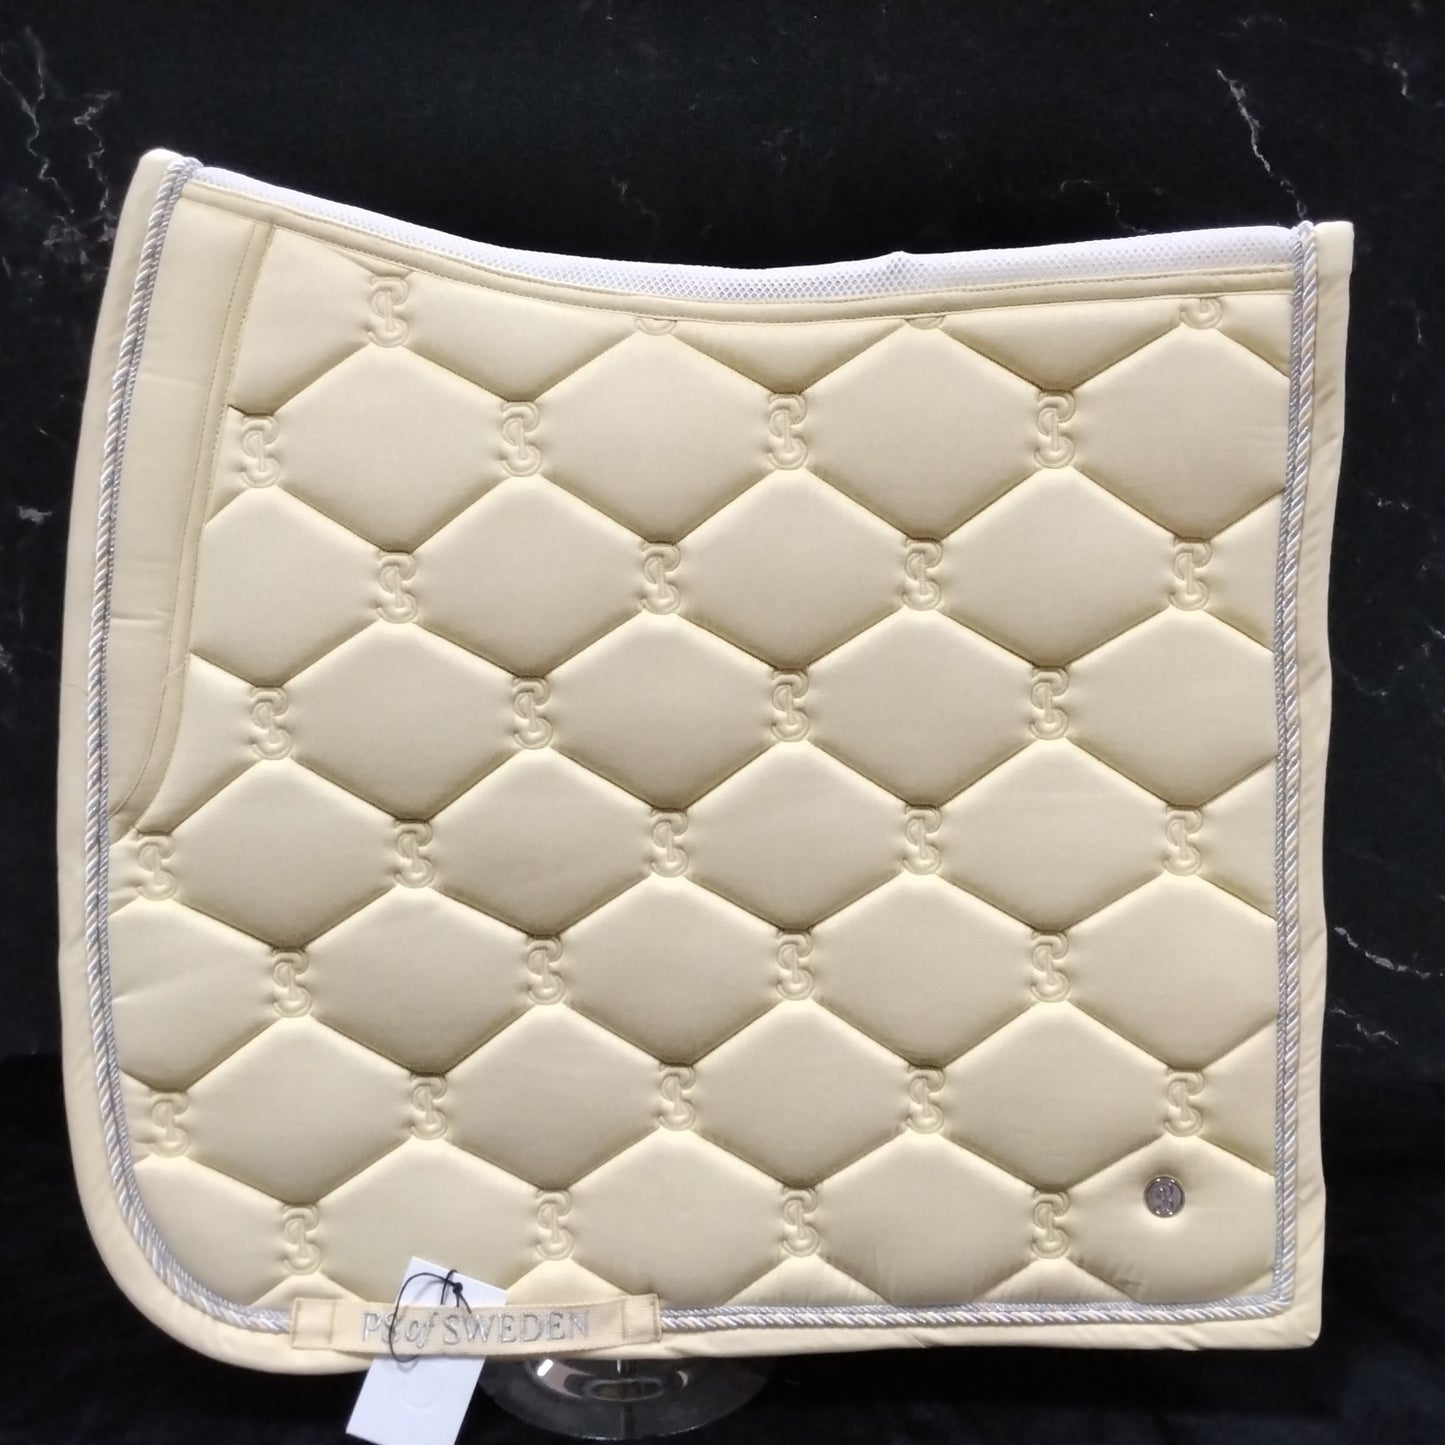 PS of Sweden Saddle Pad Dressage Classic Sunlight FULL